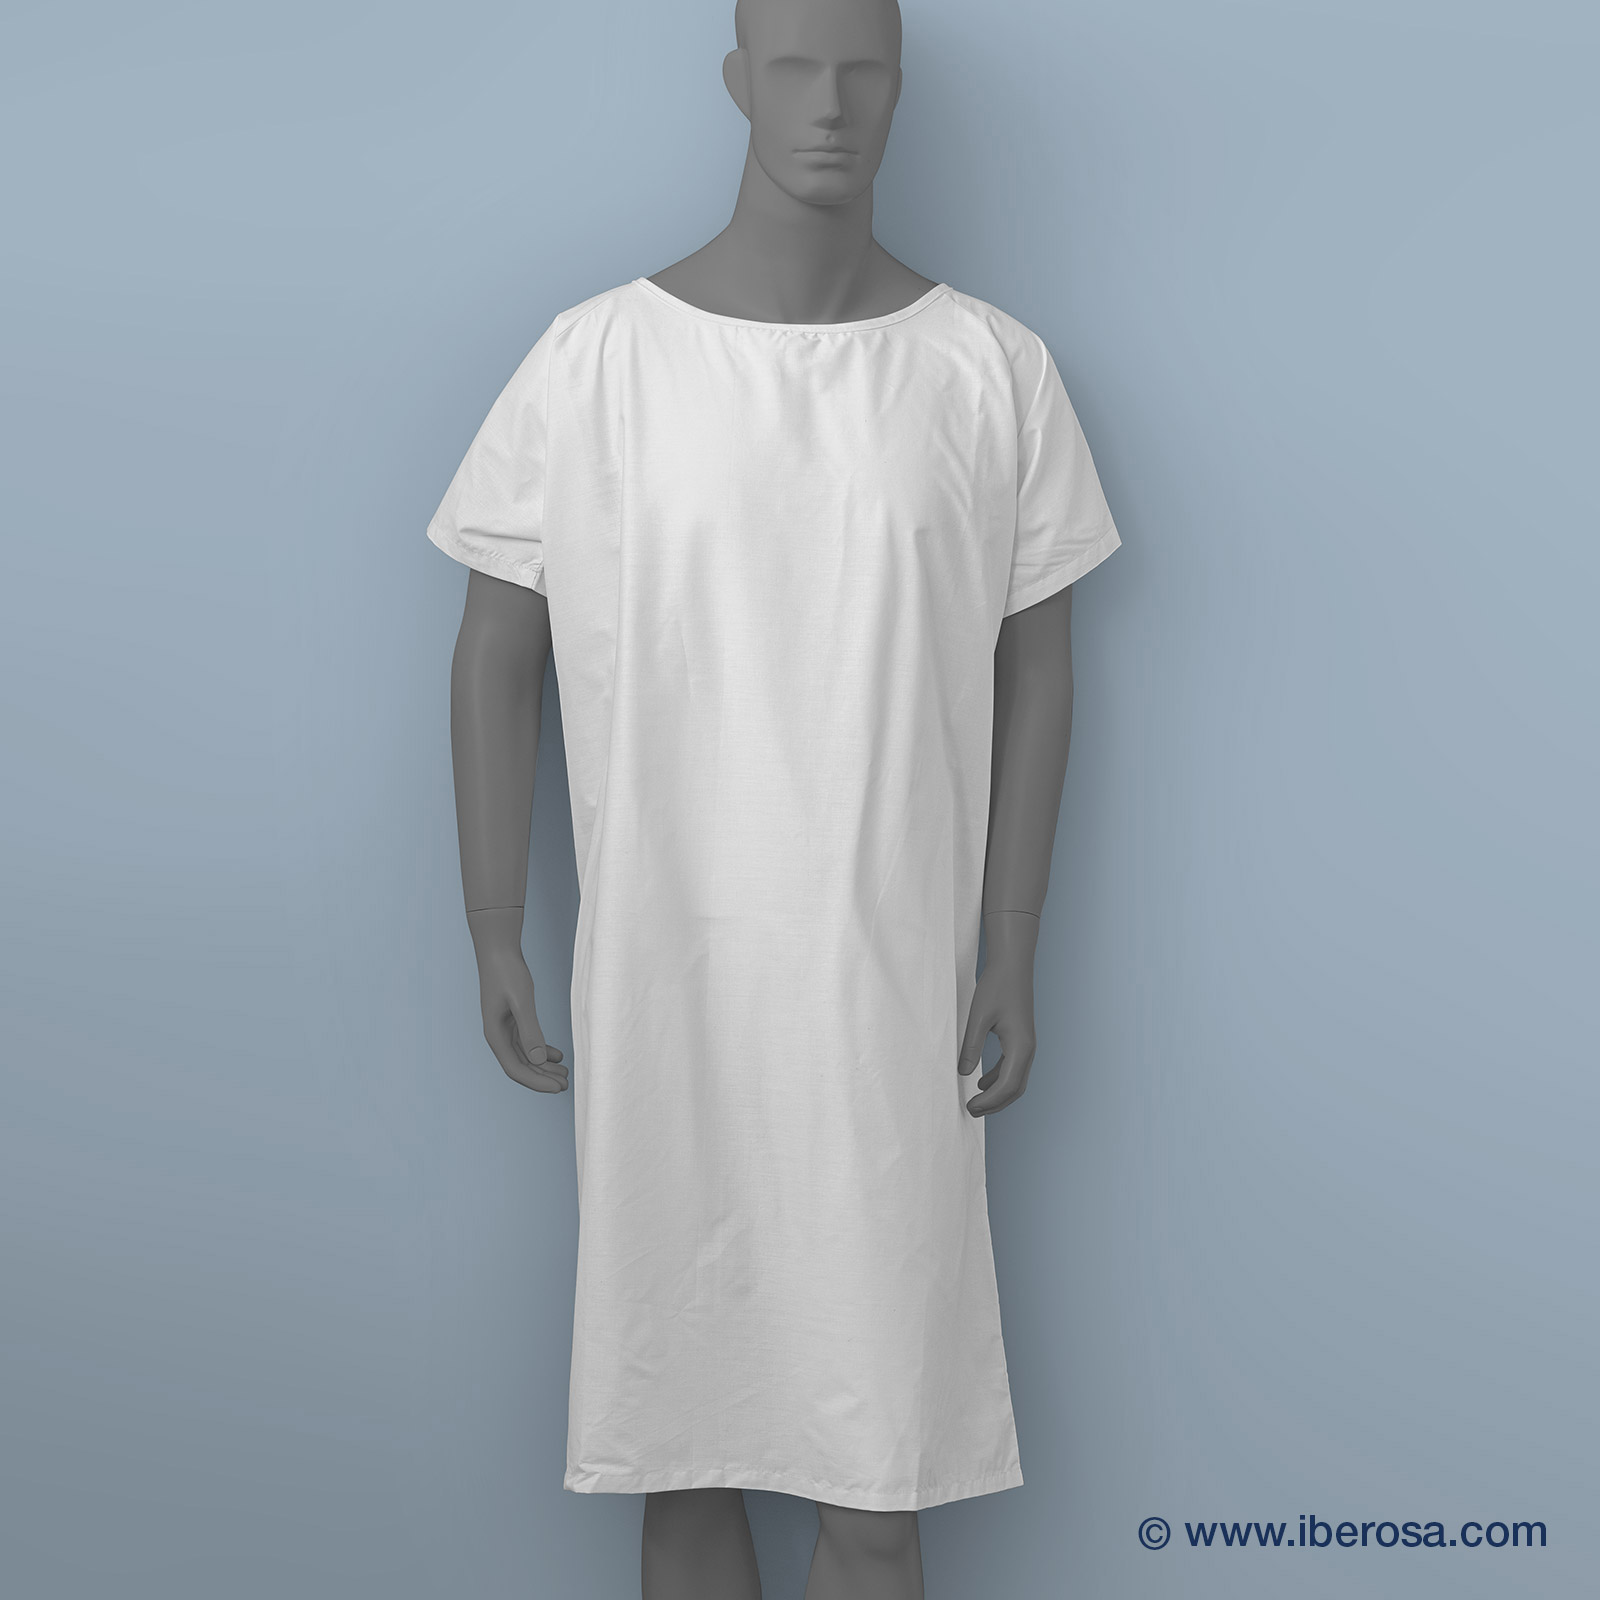 White hospital patient gown short sleeve